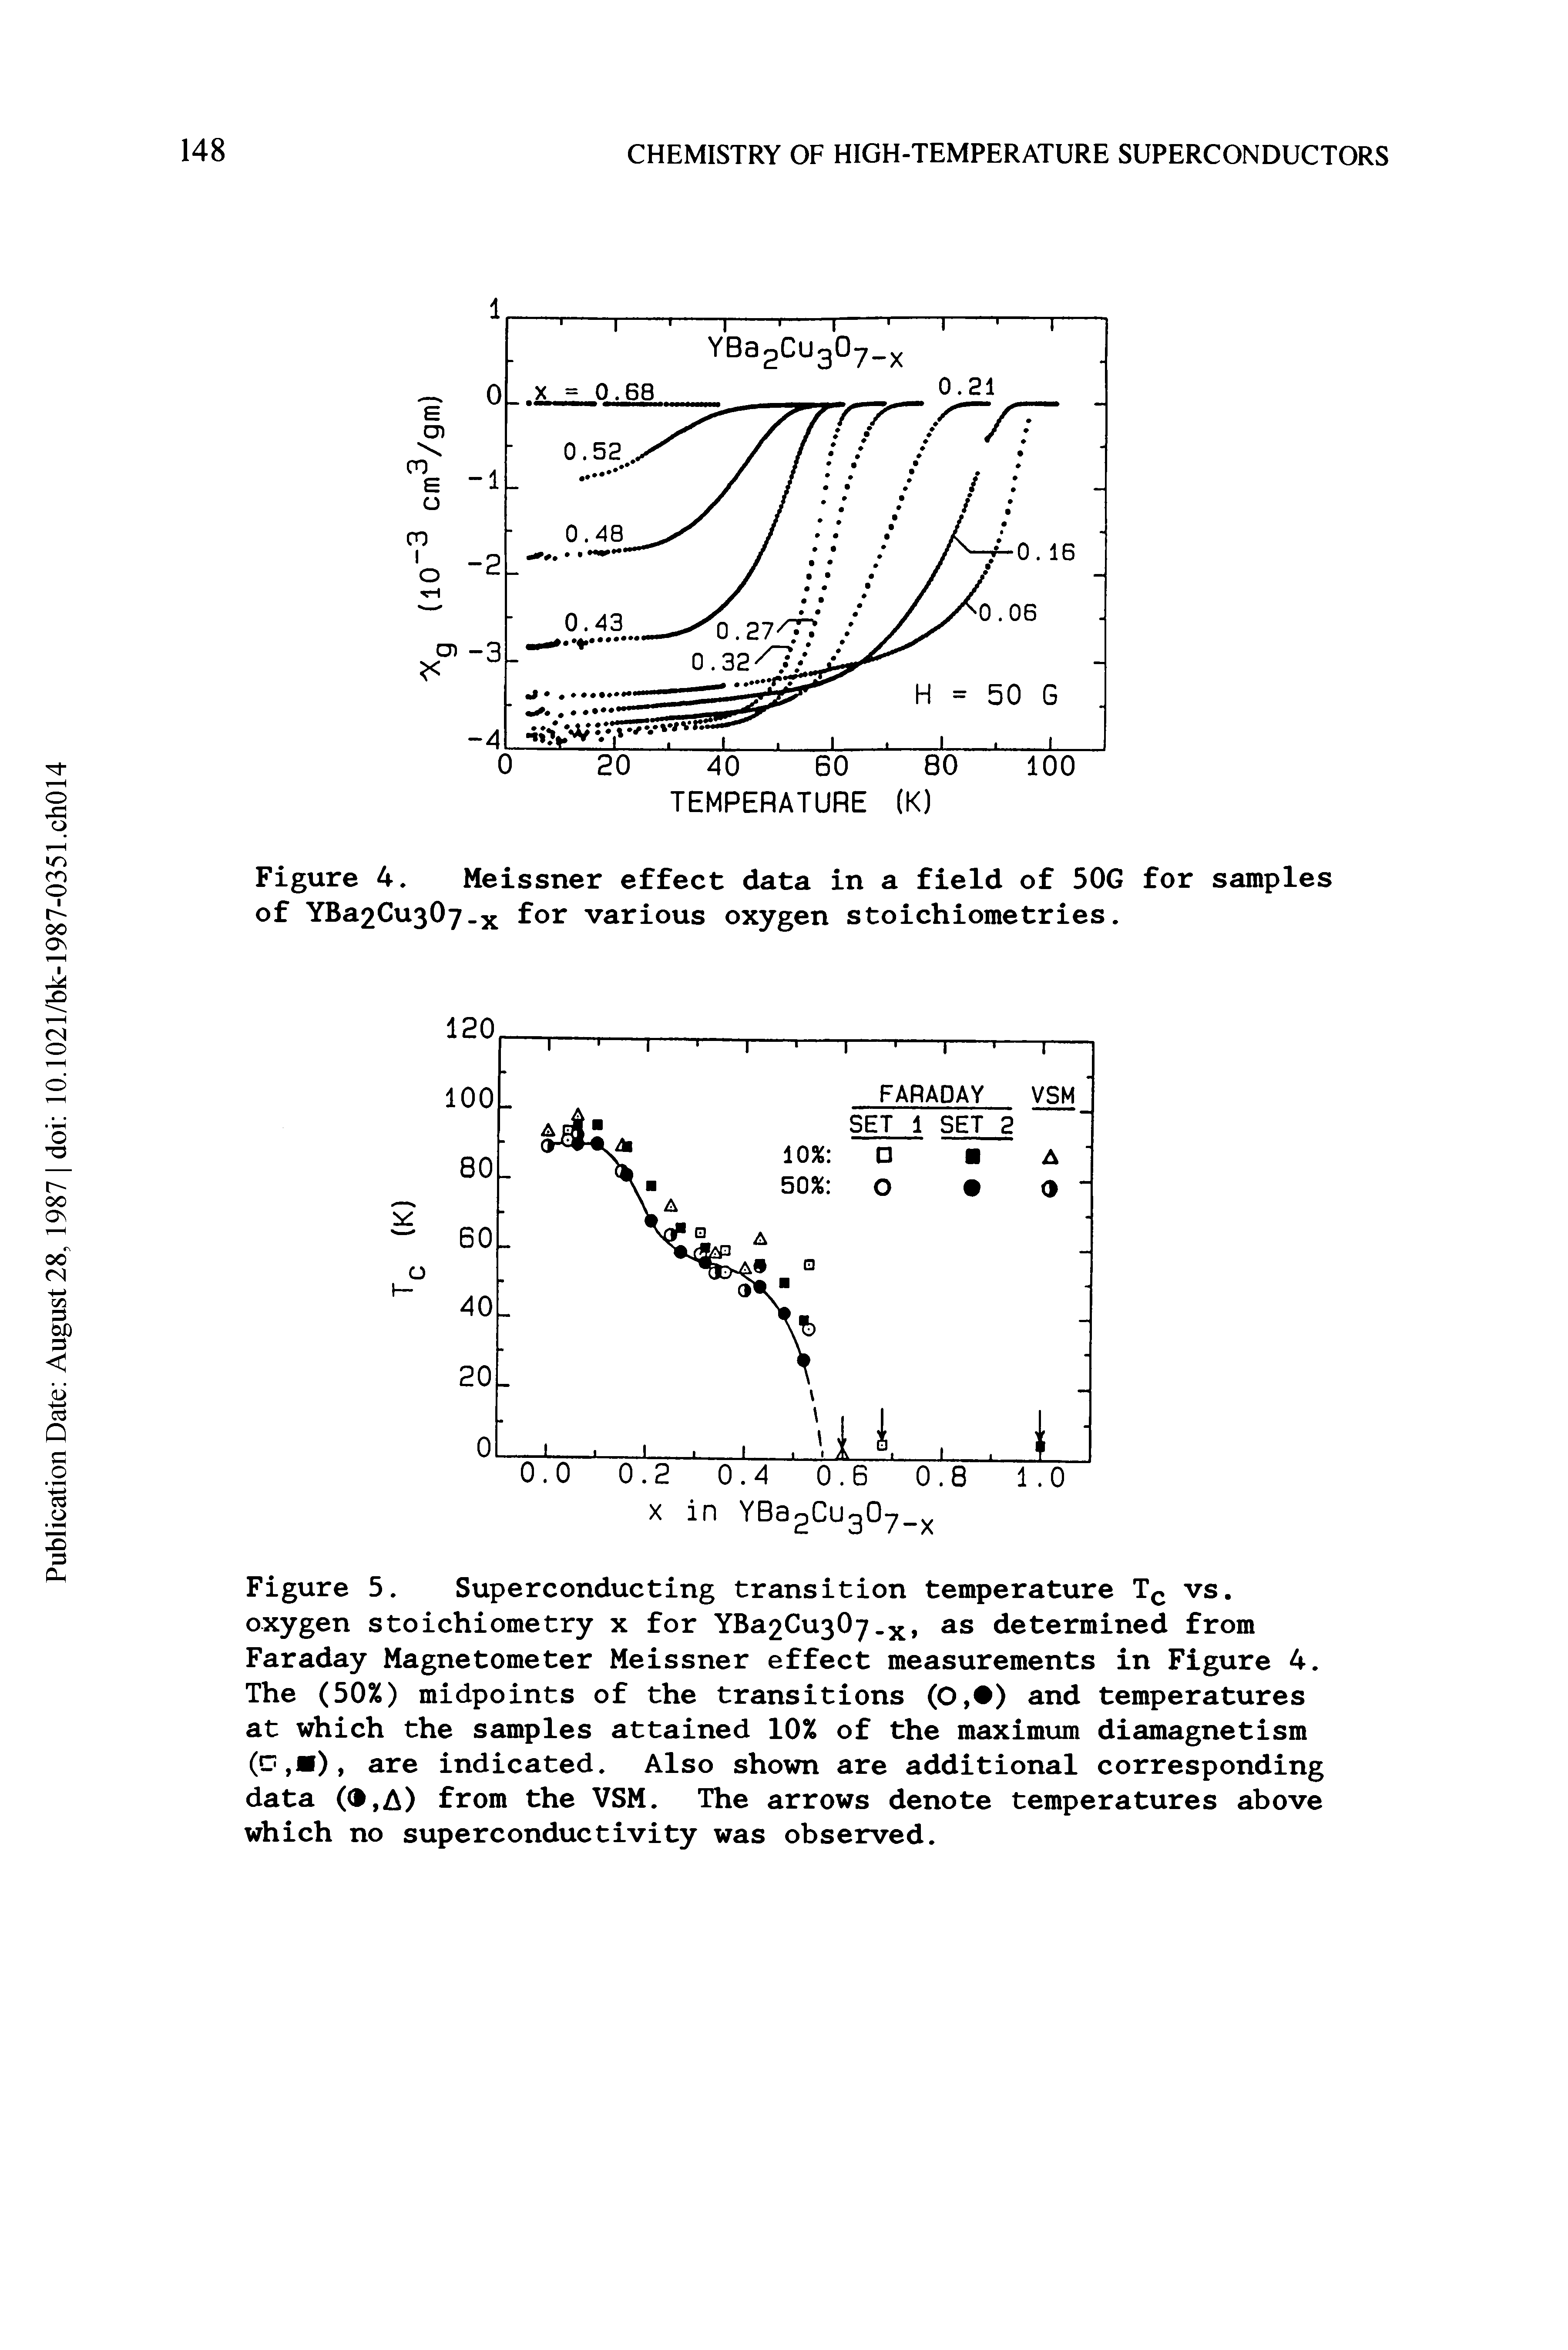 Figure 5. Superconducting transition temperature Tc vs. oxygen stoichiometry x for YBa2Cu307 x, as determined from Faraday Magnetometer Meissner effect measurements in Figure 4. The (50%) midpoints of the transitions (O, ) and temperatures at which the samples attained 10% of the maximum diamagnetism ( , ), are indicated. Also shown are additional corresponding data ( ,A) from the VSM. The arrows denote temperatures above which no superconductivity was observed.